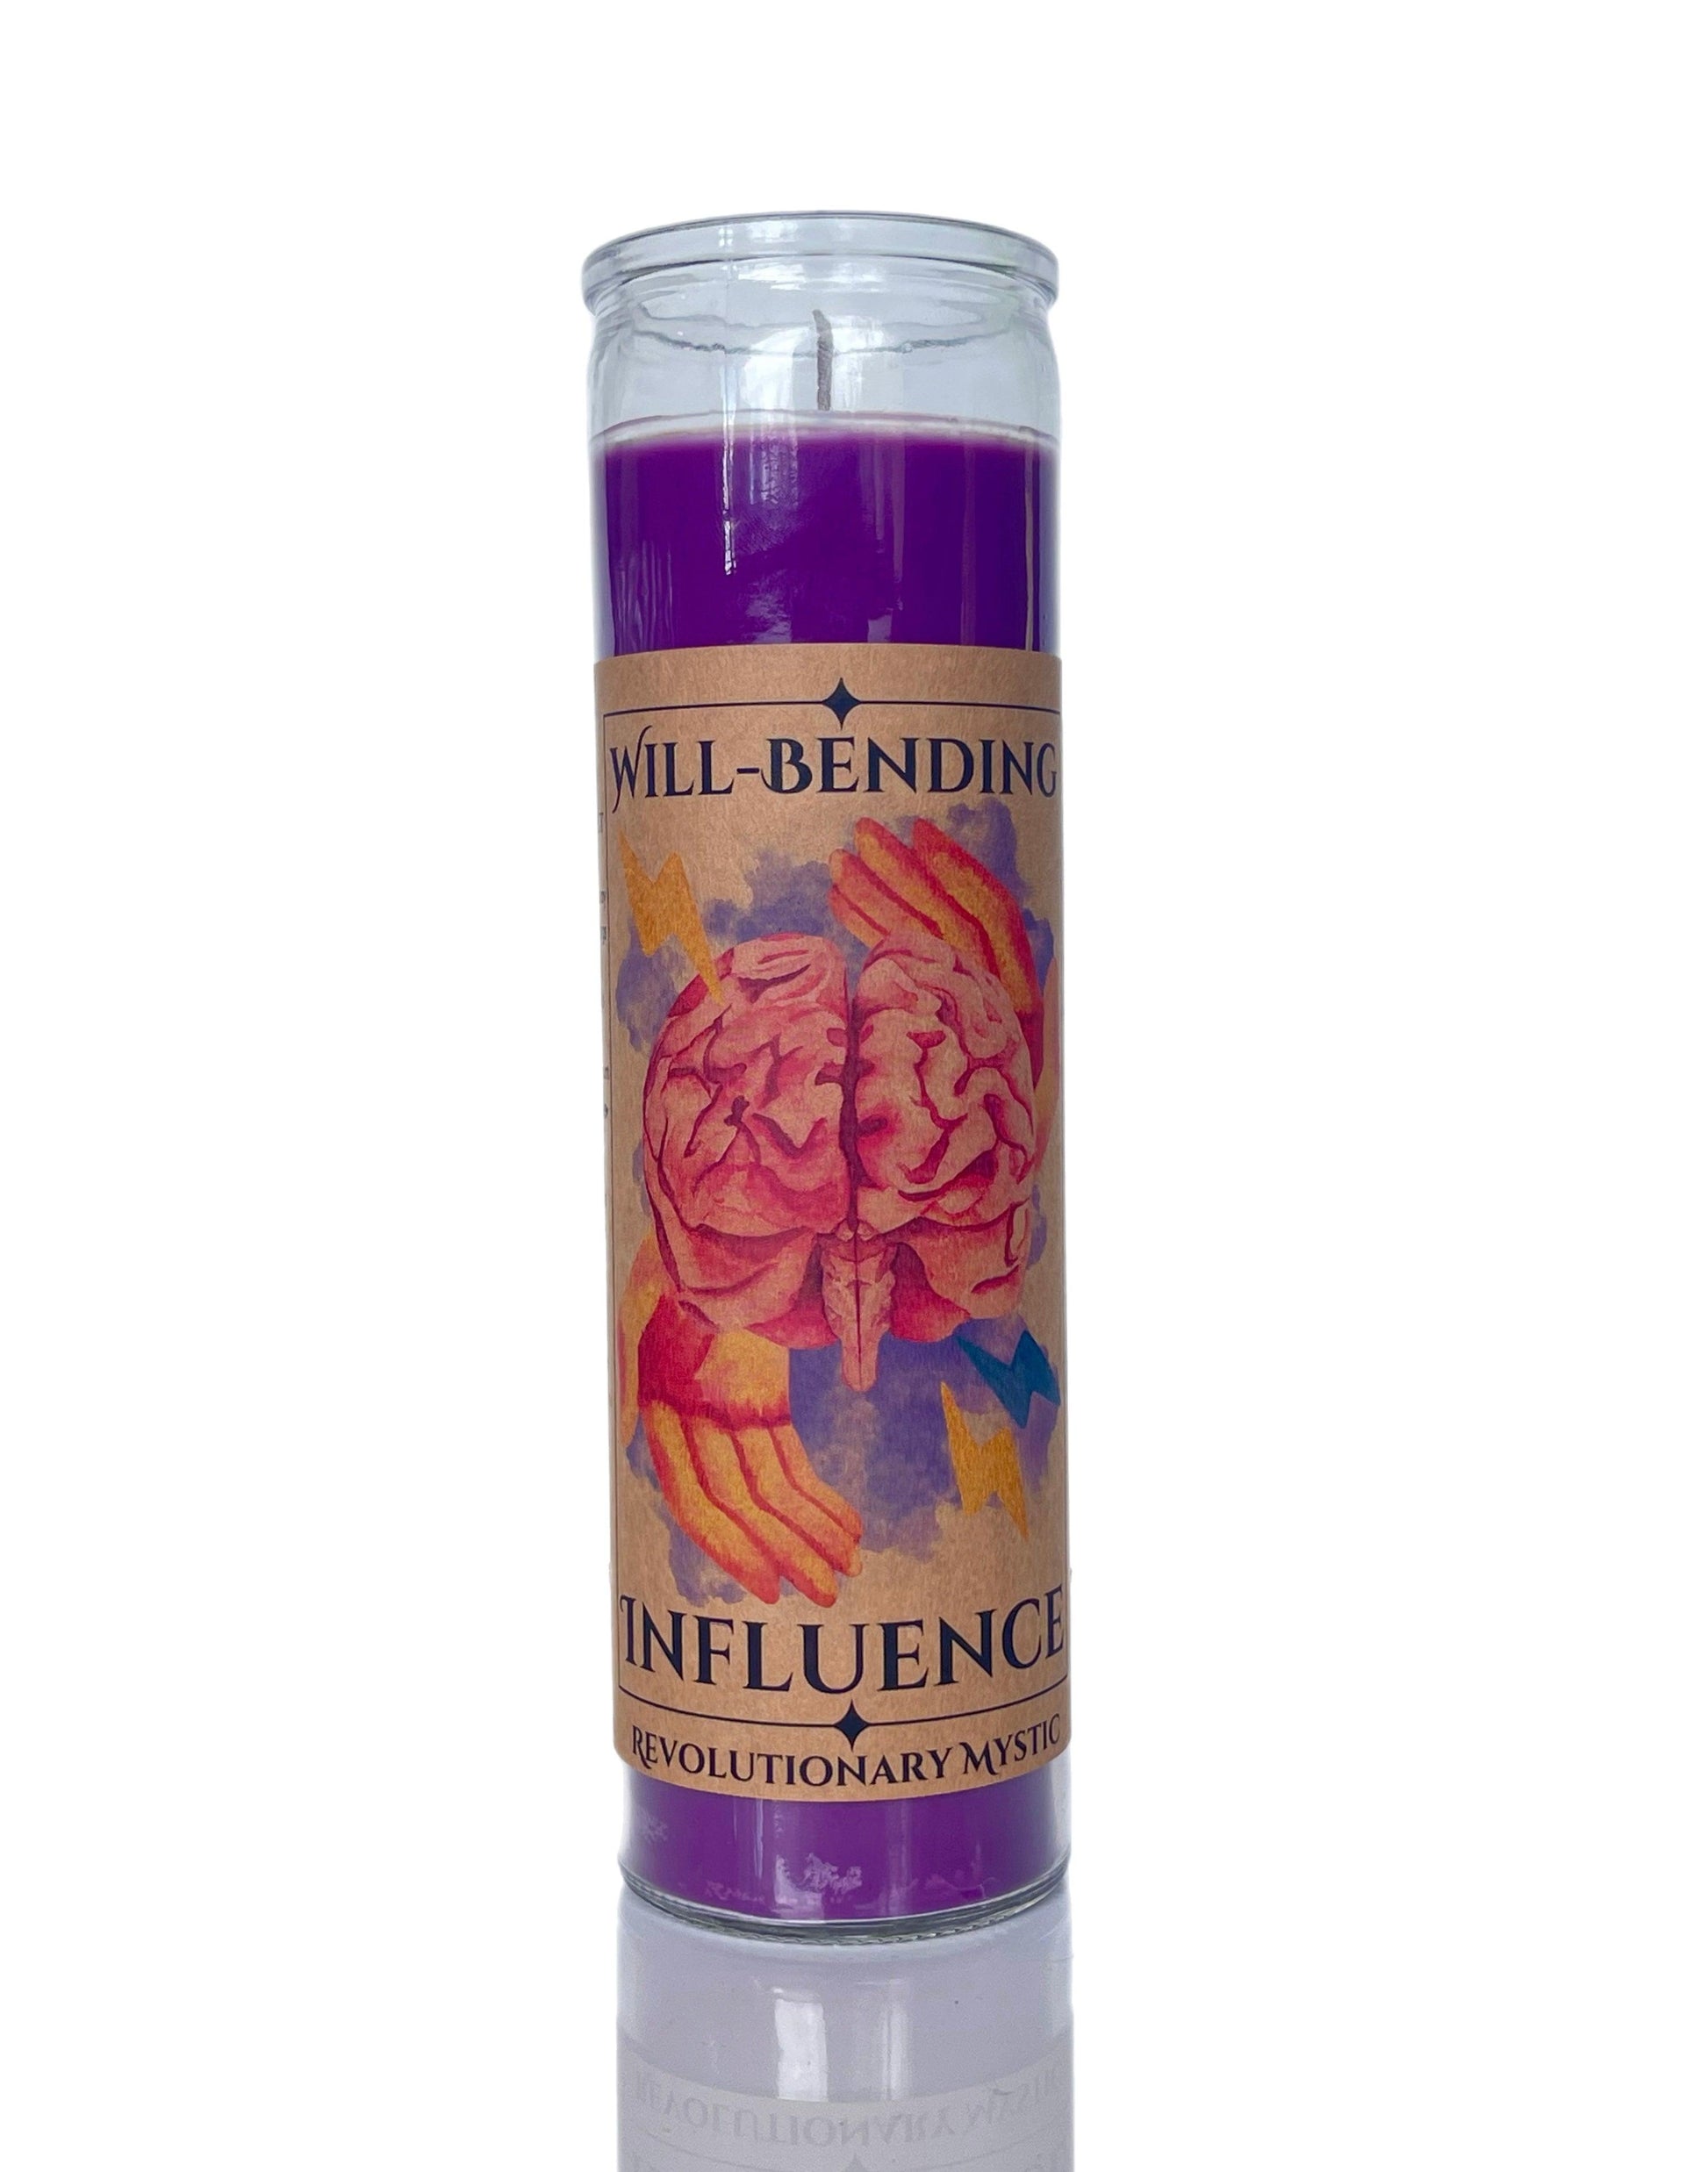 Will-Bending Influence Candle - Revolutionary Mystic